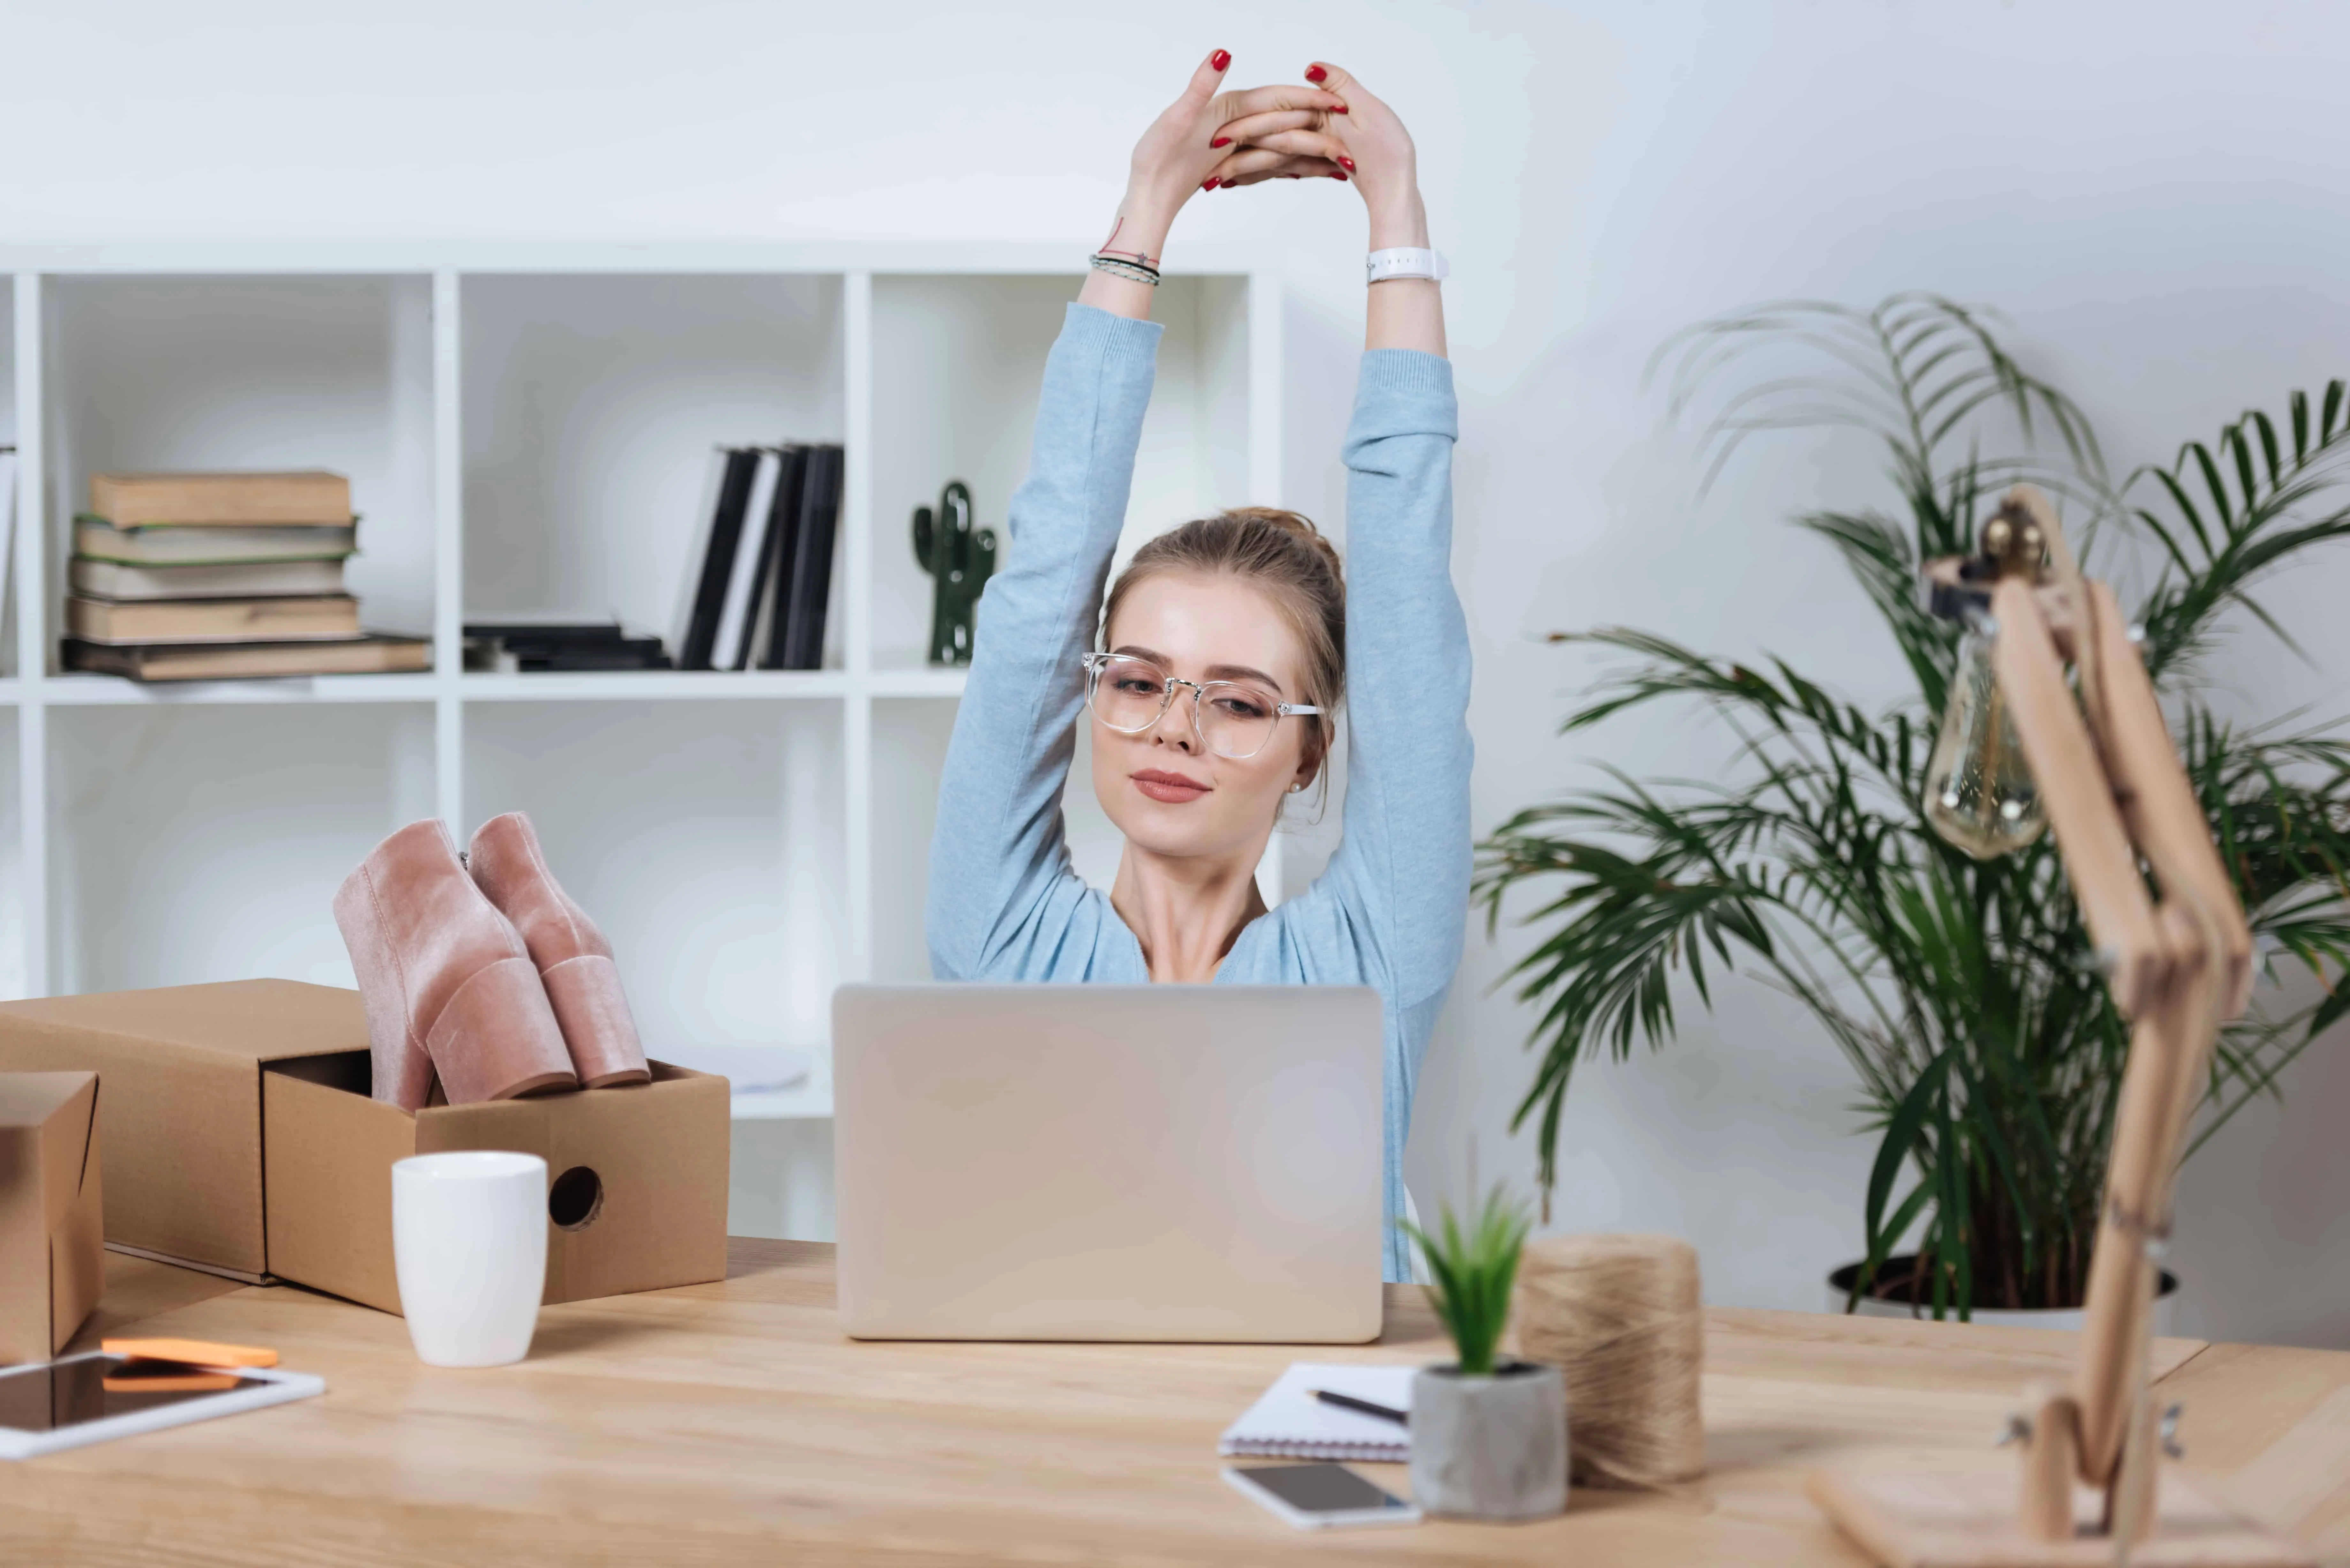 work from home jobs for mums - a woman stretching at her computer with a box of shoes ready to ship and sell online